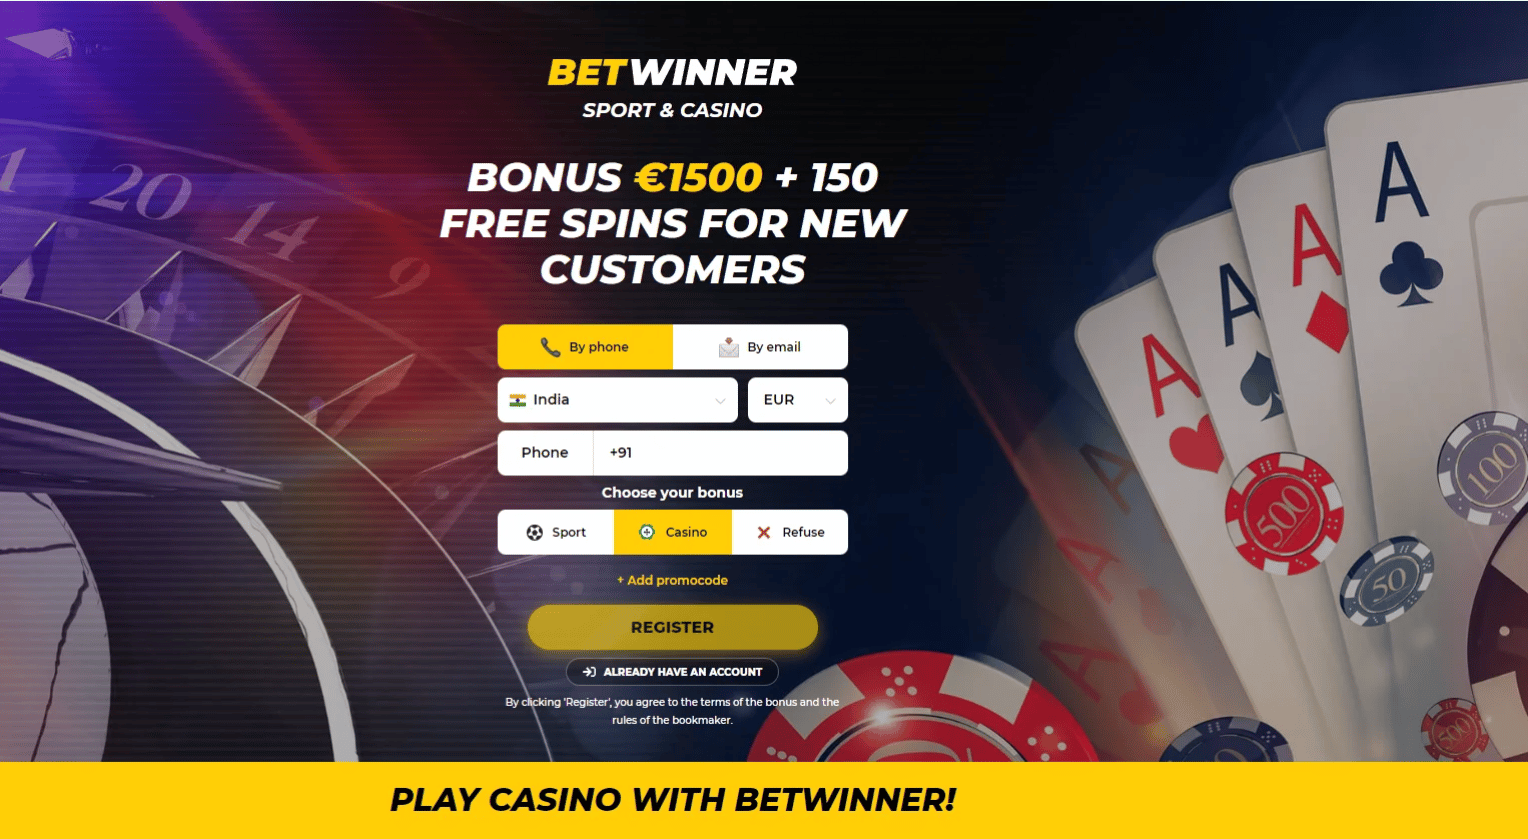 Betwinner Casino offers an attractive welcome bonus for new casino customers.